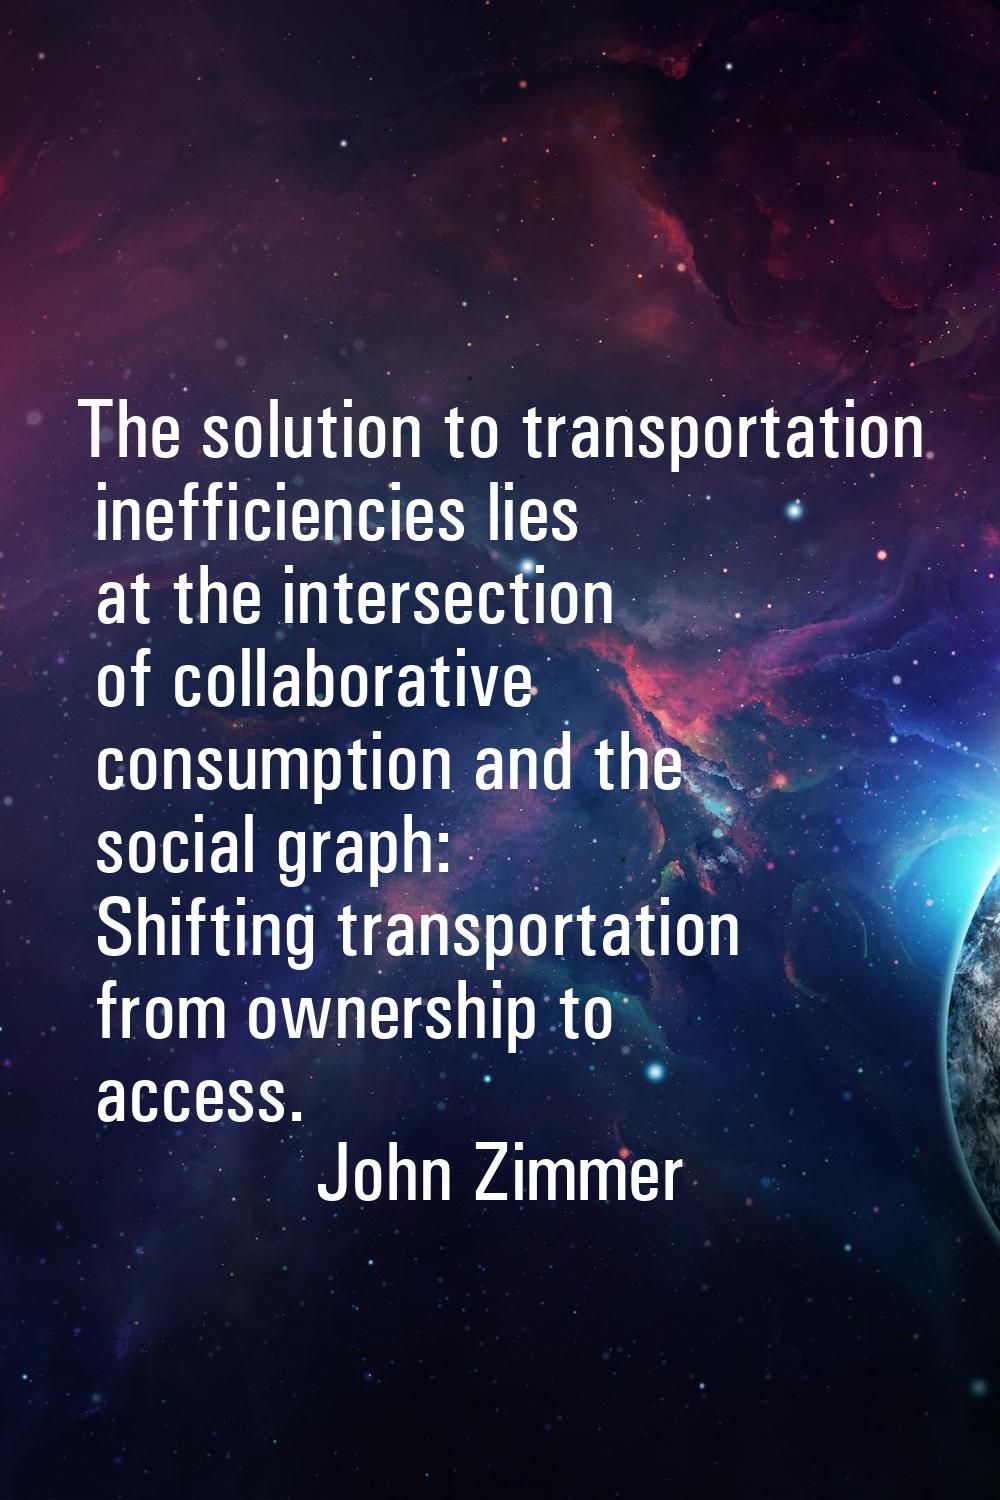 The solution to transportation inefficiencies lies at the intersection of collaborative consumption